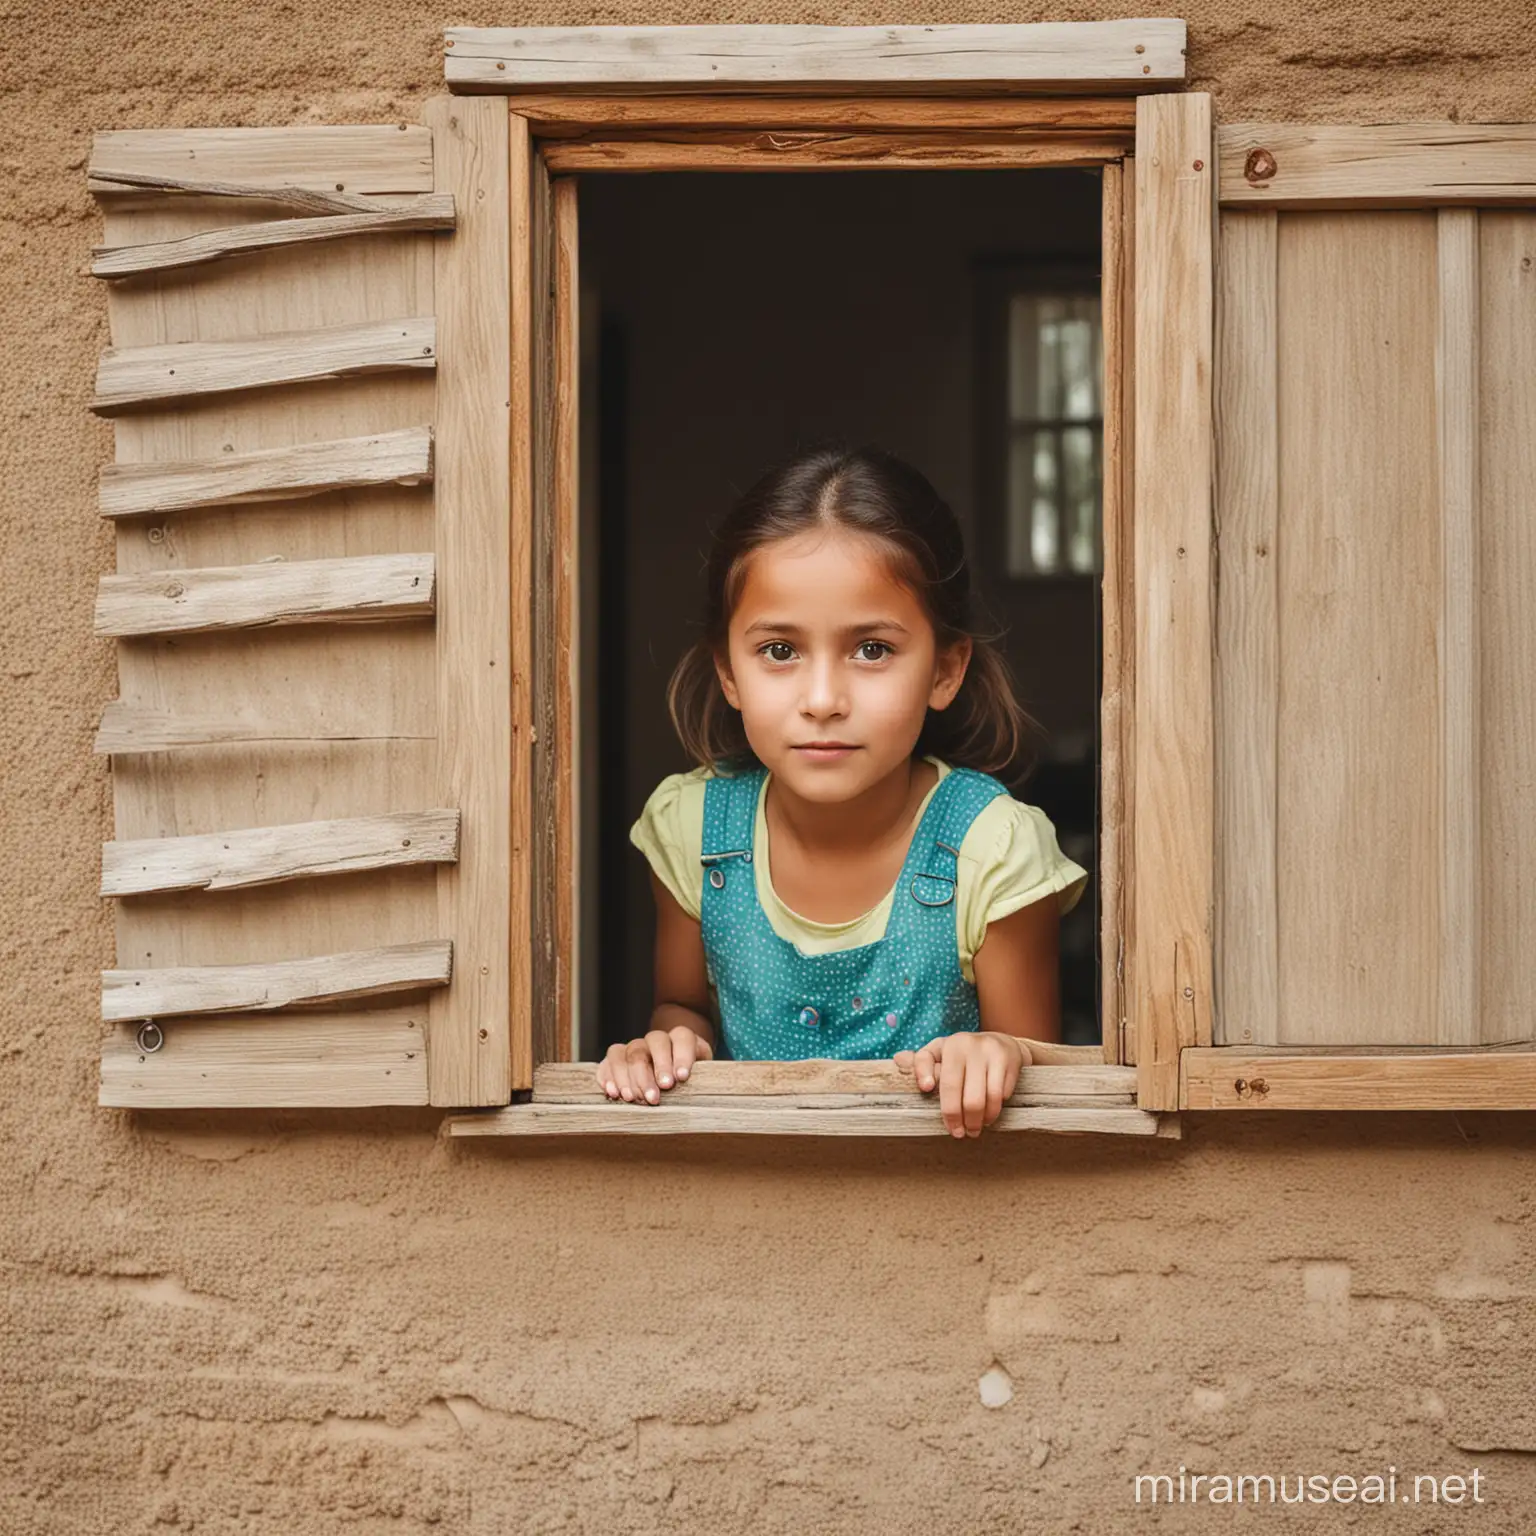 Image of a girl child standing behind the window wanting to go out hut held at home 